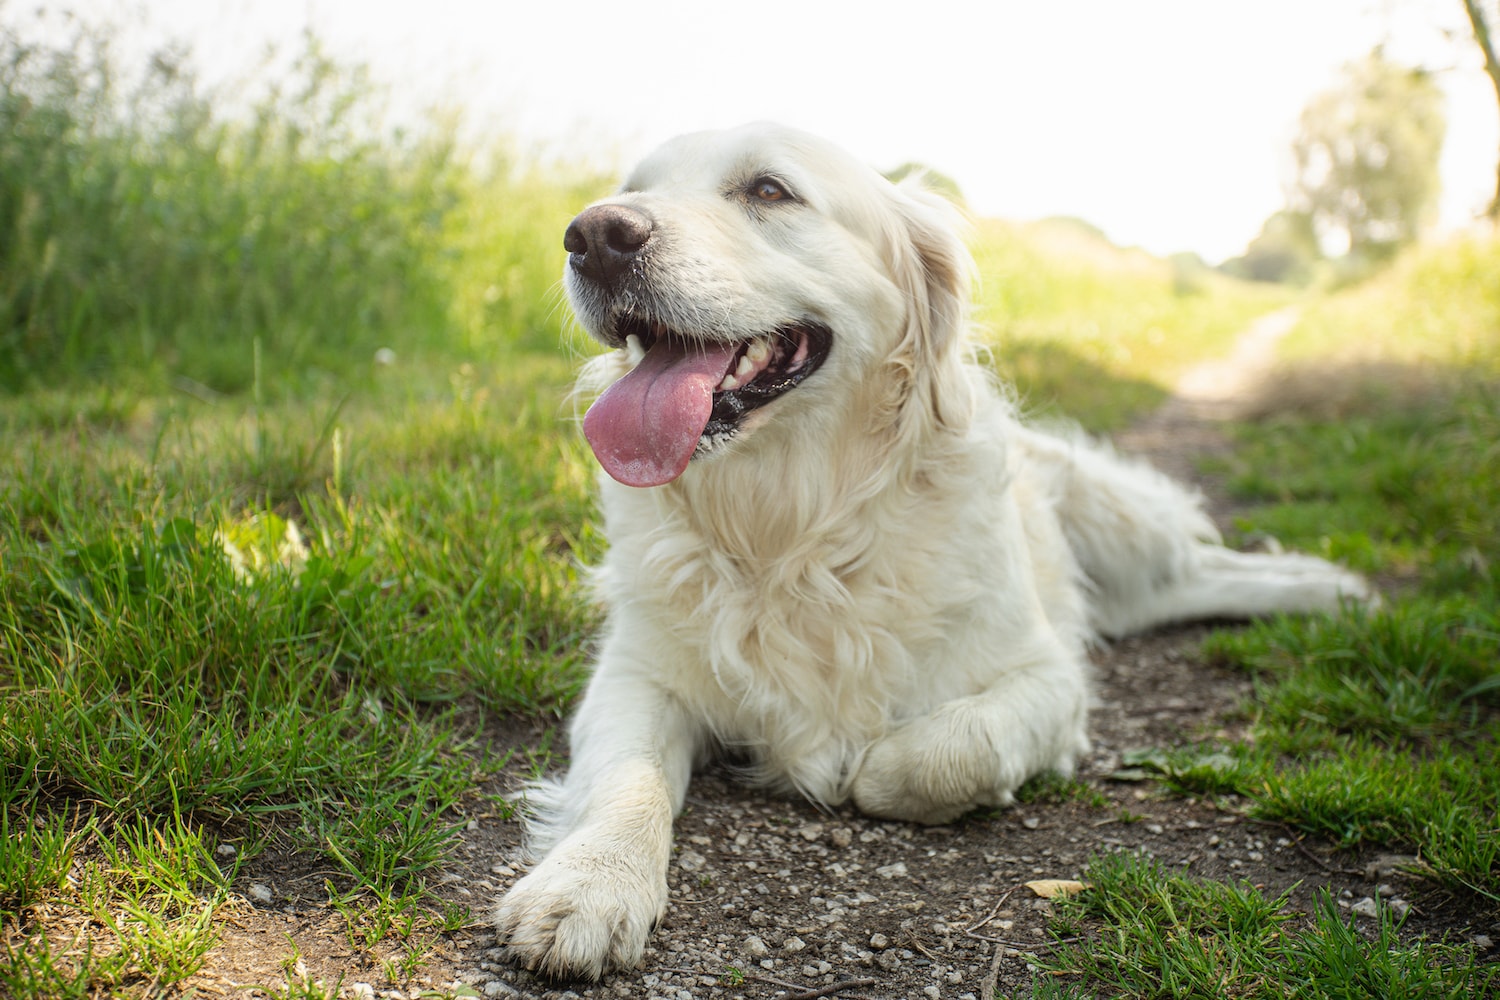 Is your dog panting too much?